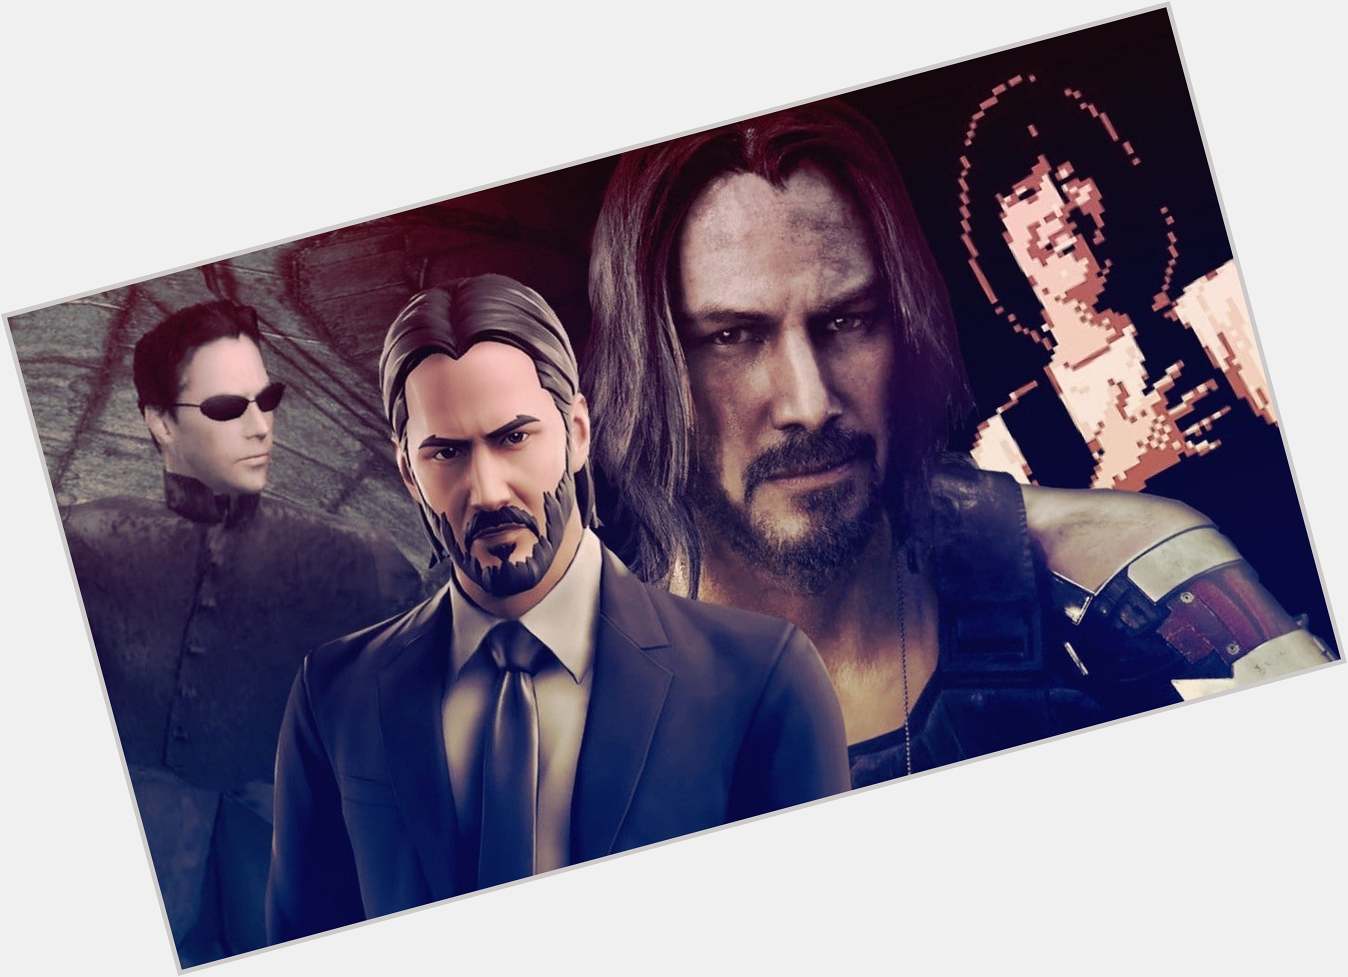 Happy Birthday Keanu Reeves! 

Here s a history of the actor s presence in video games:  